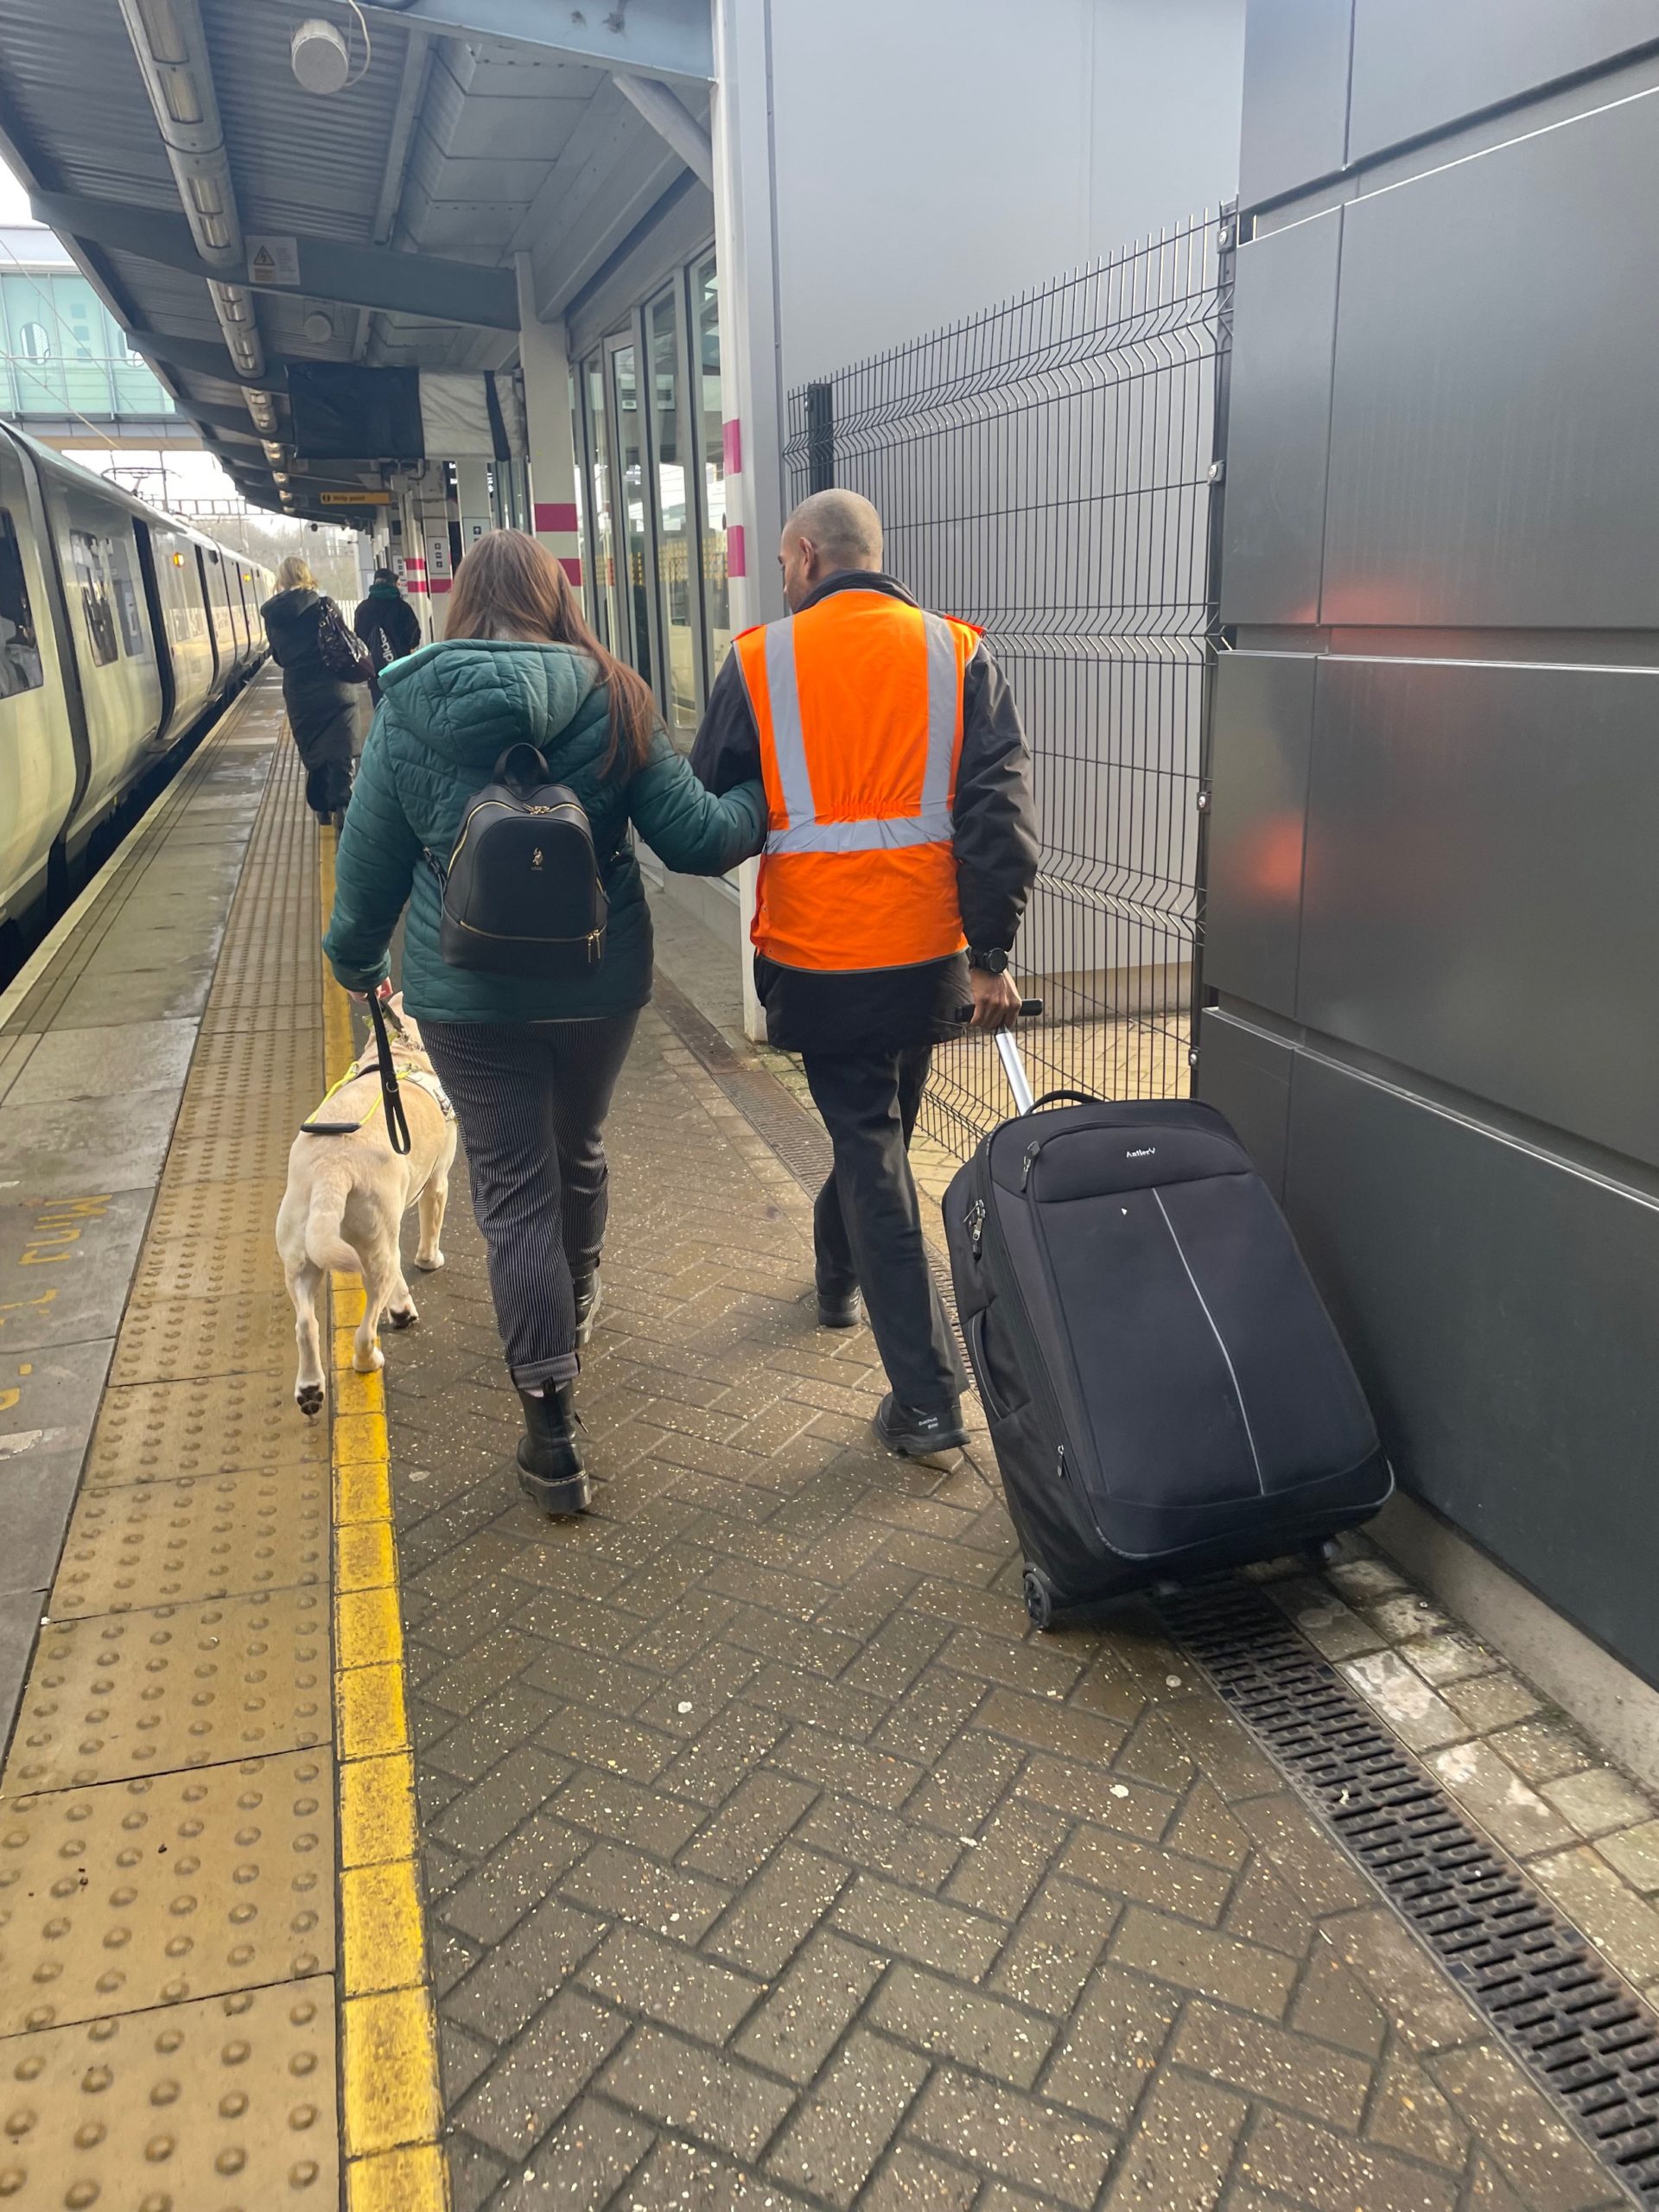 Image shows Samantha Leftwich, Bedfordshire Engagement Manager, being assisted by GTR staff at Luton Parkway. Sam is being guided by the arm and the assistant is pulling a large suitcase. Sam is holding guide dog lizzie’s lead. They are walking along the platform, next to a train. Their backs are to the camera.